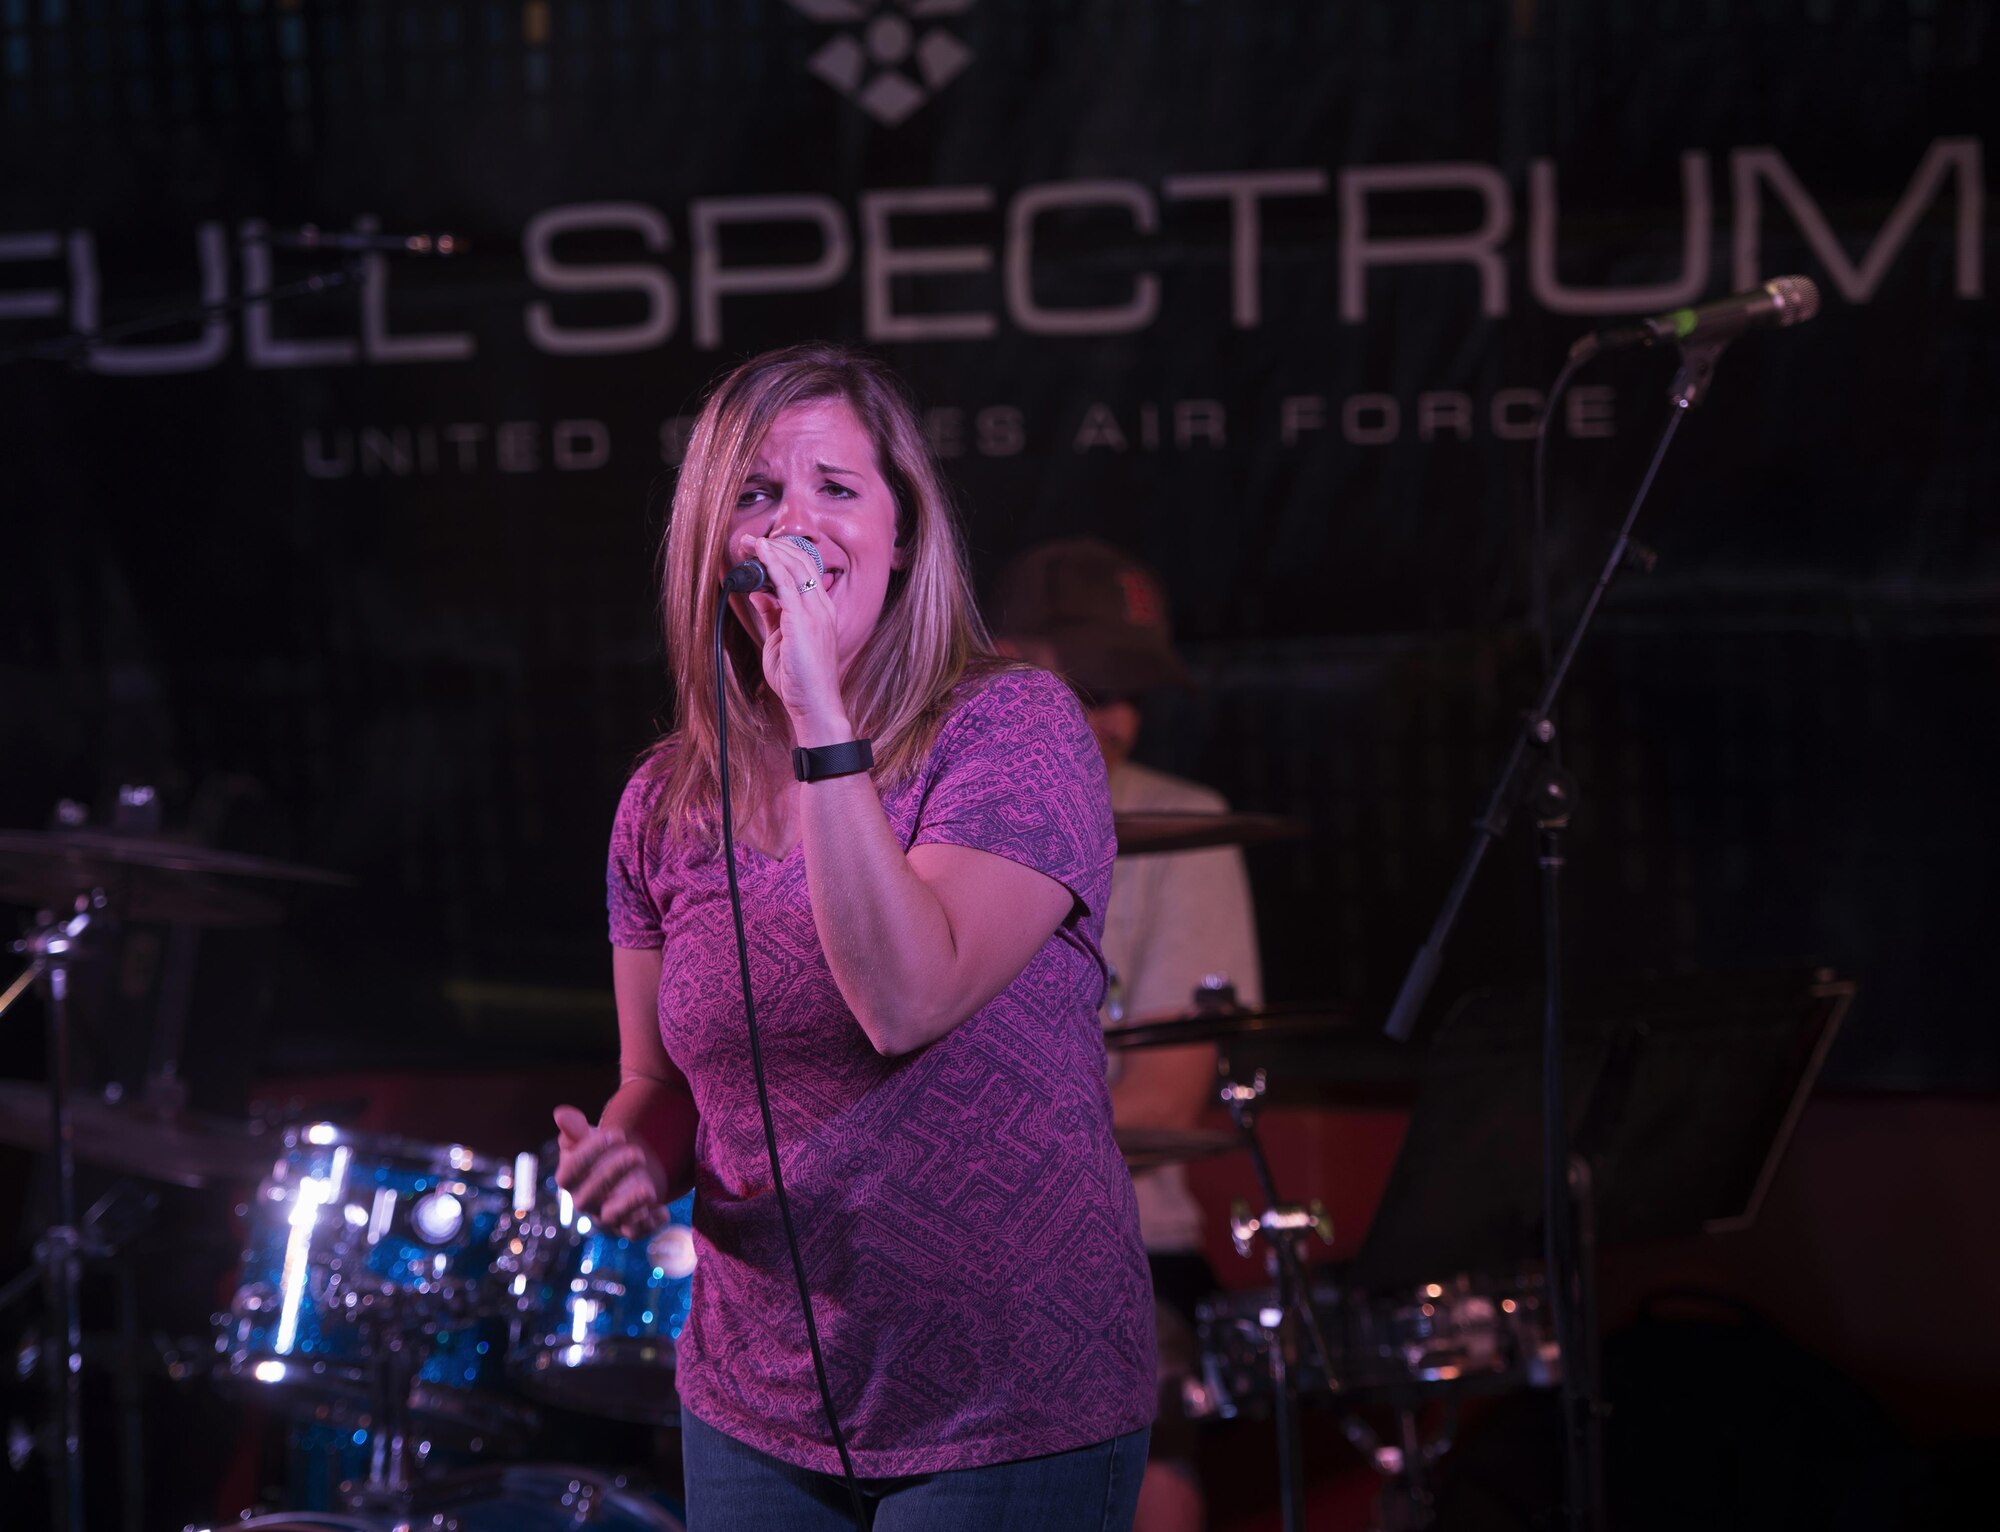 Senior Airman Melissa Lackore, a vocalist with the U.S. Air Force’s Central Command Band, Full Spectrum, performs at the Fox Sports Lounge at Al Udeid Air Base, Qatar Oct. 13, 2015. The performance was the band’s last before the group kicks-off a 16-day tour. During the show, which featured hit songs “Uptown Funk” and “Beat It,” the group was greeted by loud cheers from the audience. (U.S. Air Force Photo/Tech. Sgt. James Hodgman)